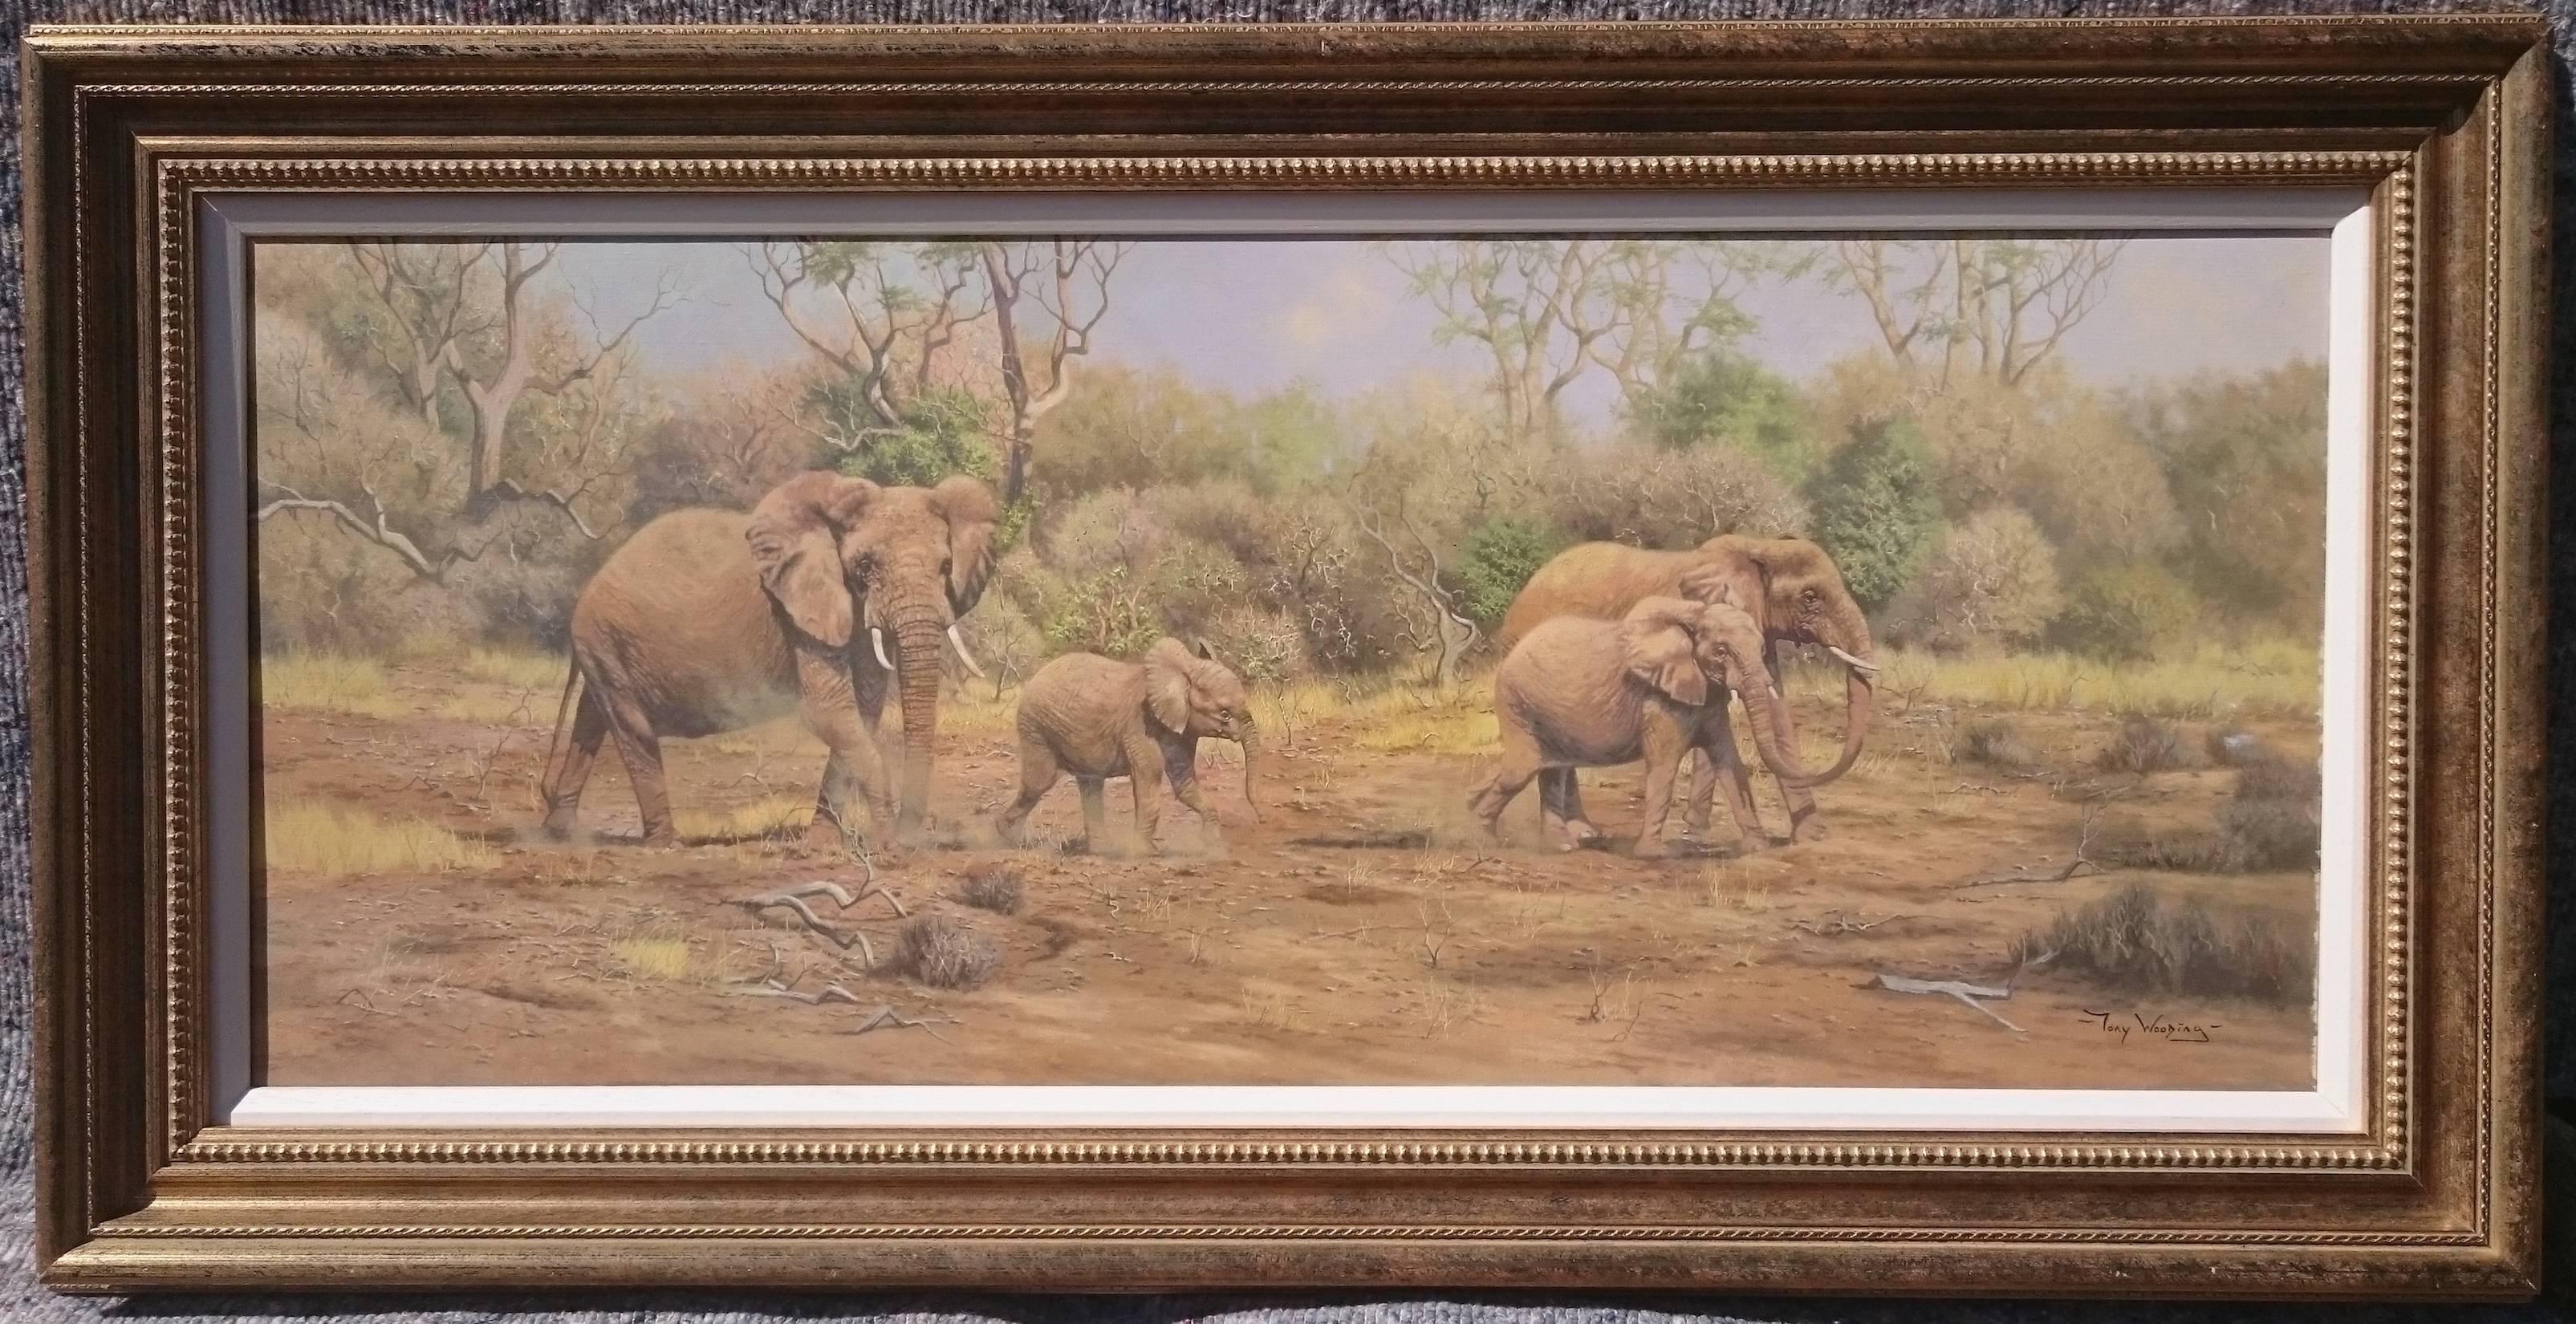 Painting of elephants in an African landscape signed by the artist. Tony Wooding was born in 1969 and is largely self taught painted of wildlife and Welsh landscapes. His work is exhibited widely and his African scenes are sought after.

Measure: